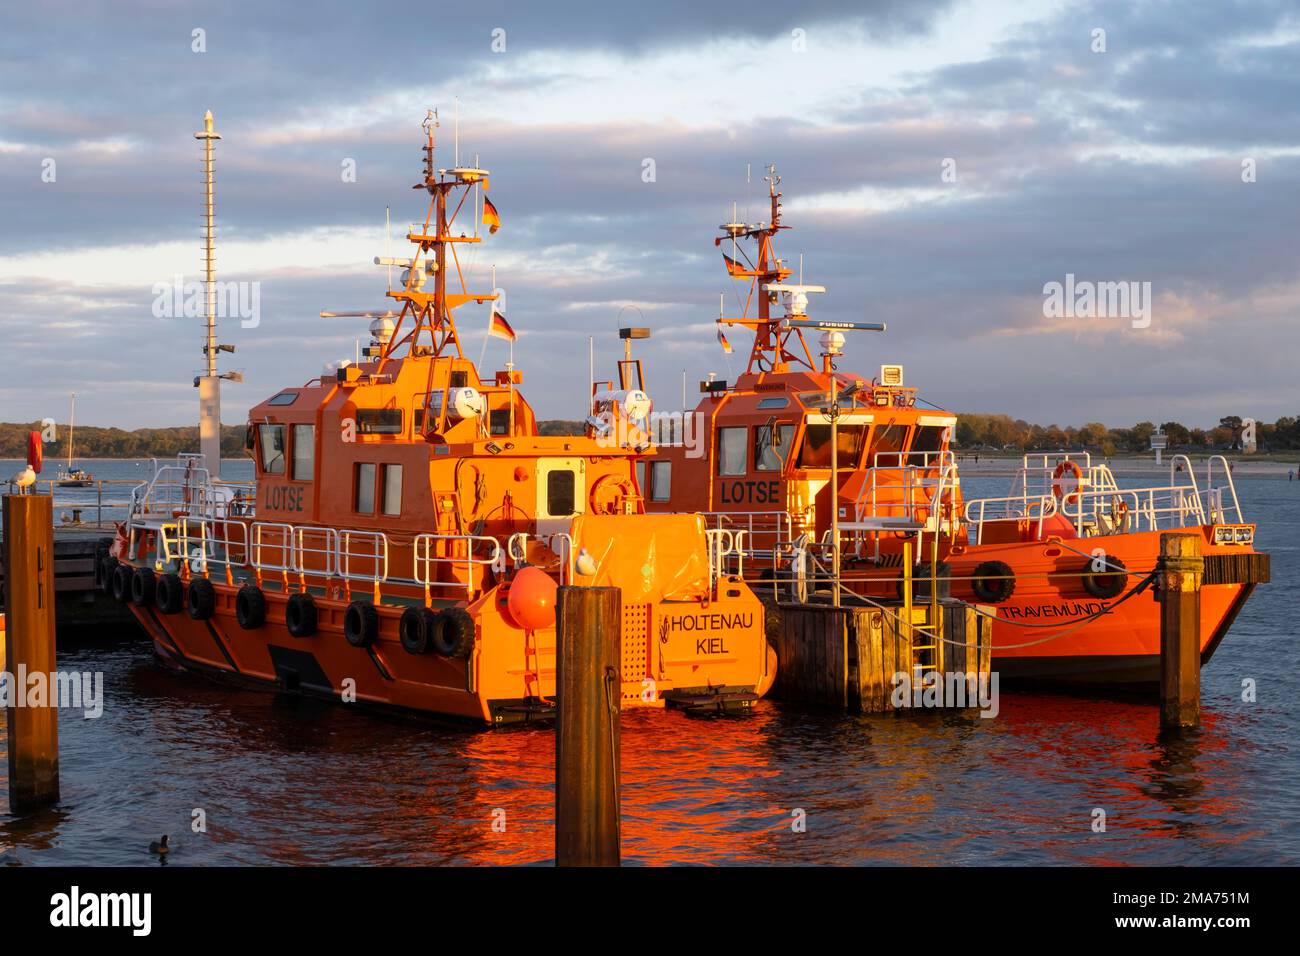 Pilot boats in the harbour, Travemuende, Luebeck, Baltic Sea, Schleswig-Holstein, Germany Stock Photo